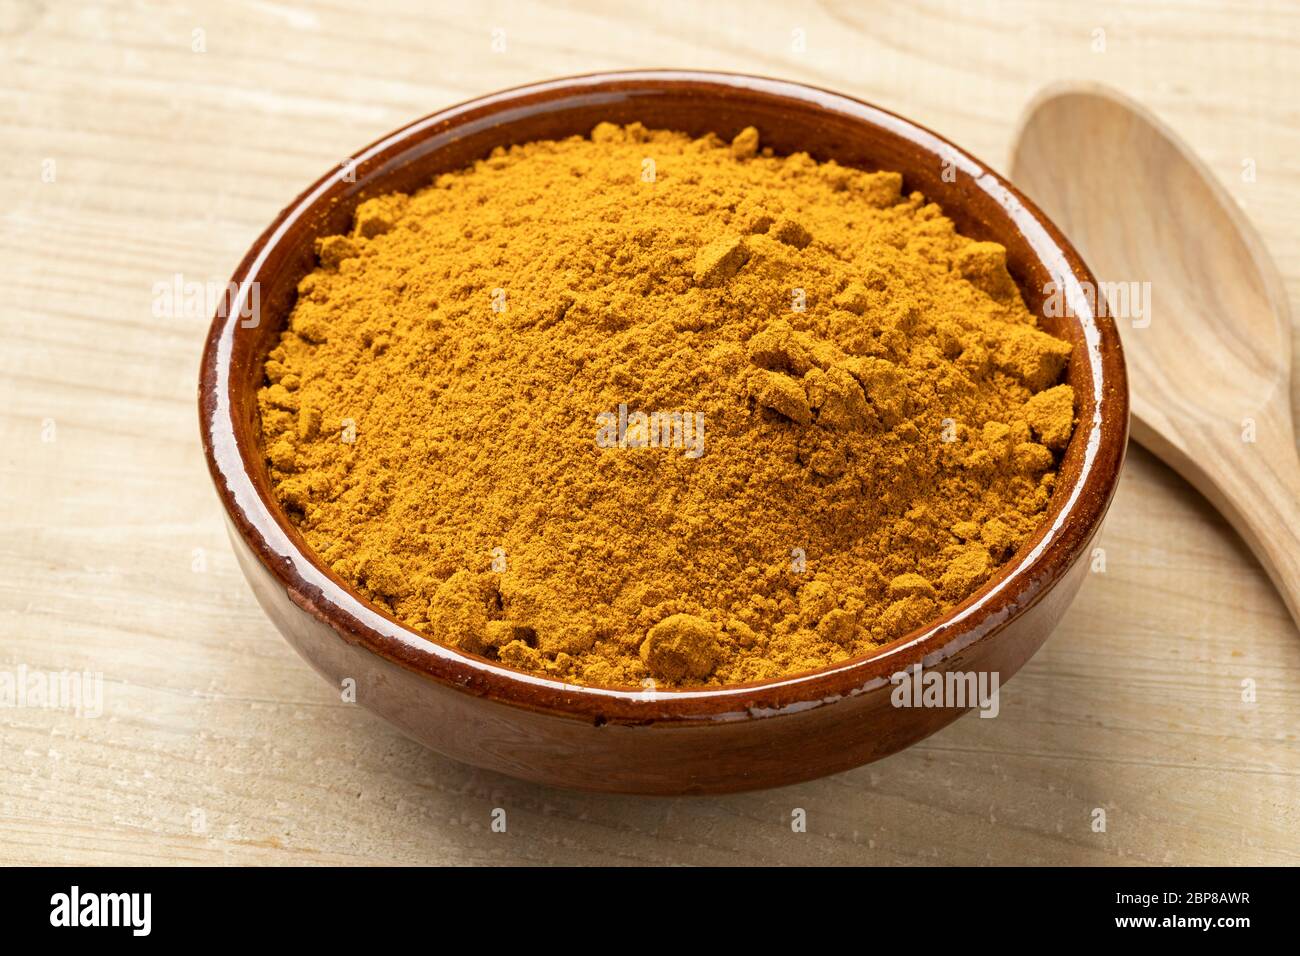 Bowl with traditional Indian masala powder Stock Photo